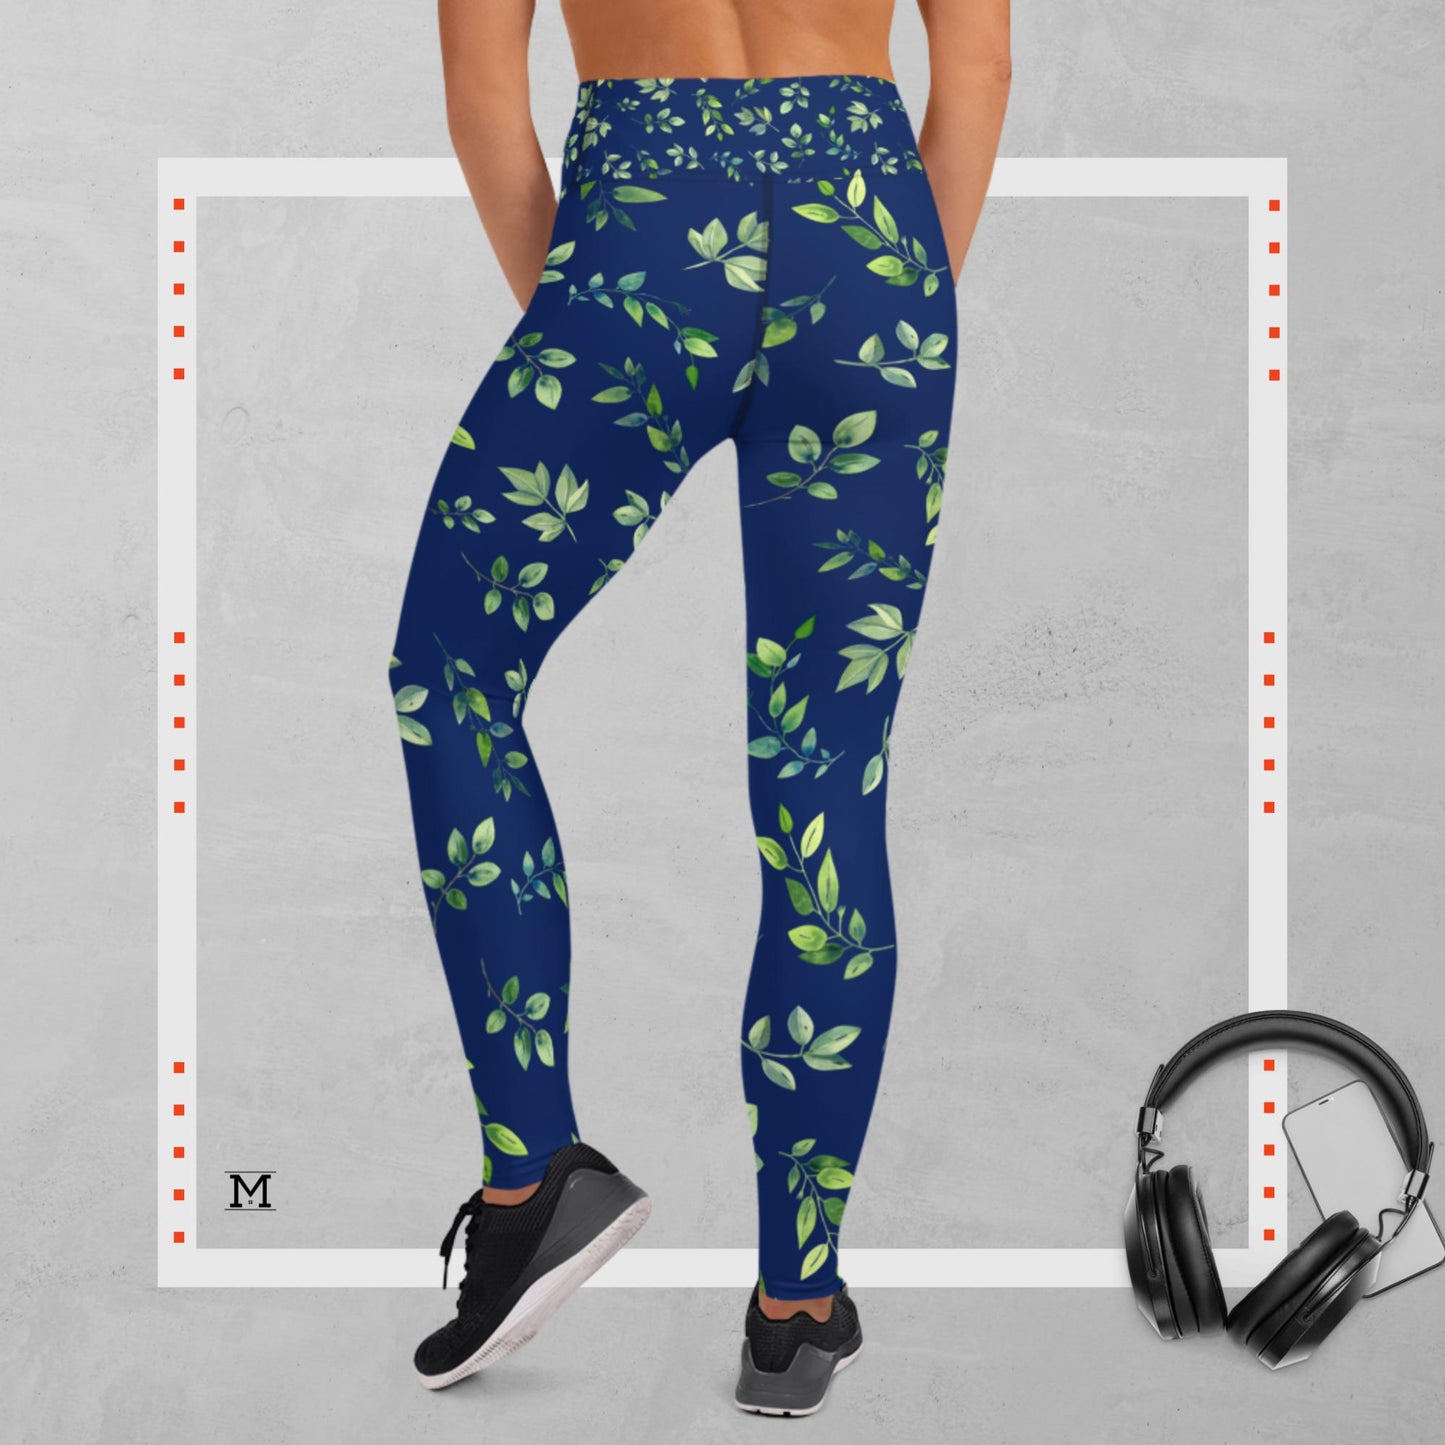 Yoga Leggings AOP (All over print) green floral on blue background by MII